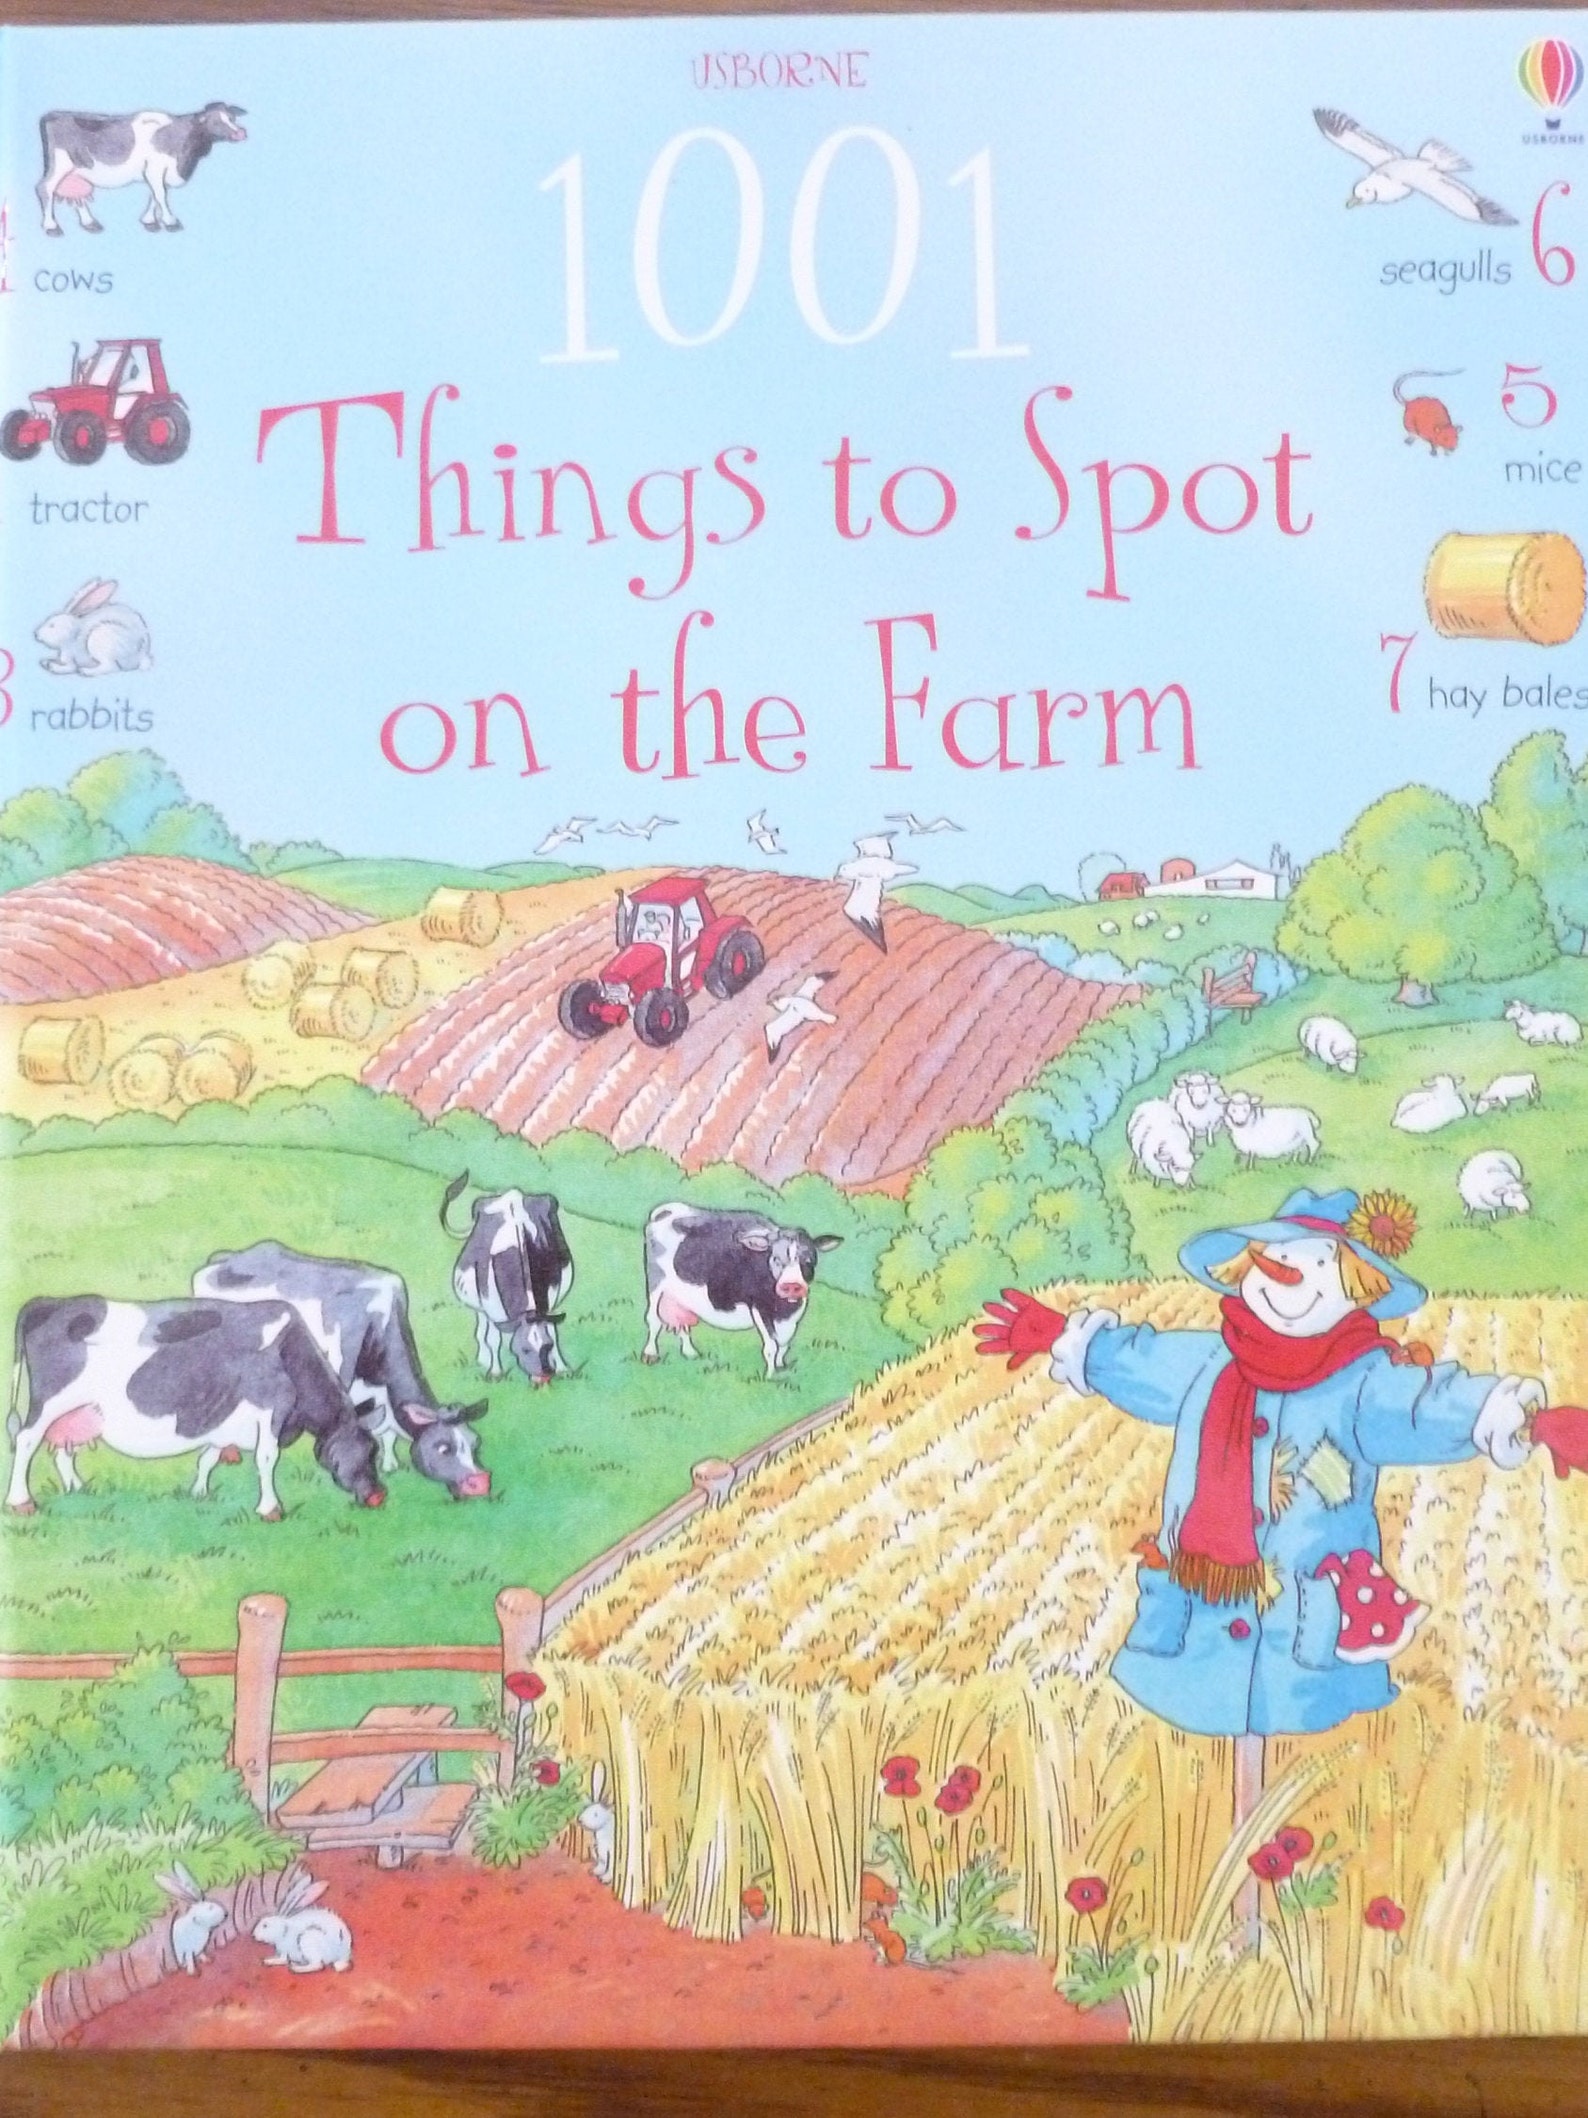 1001 Things to Spot on the Farm hardcover by Usborne Books | Etsy